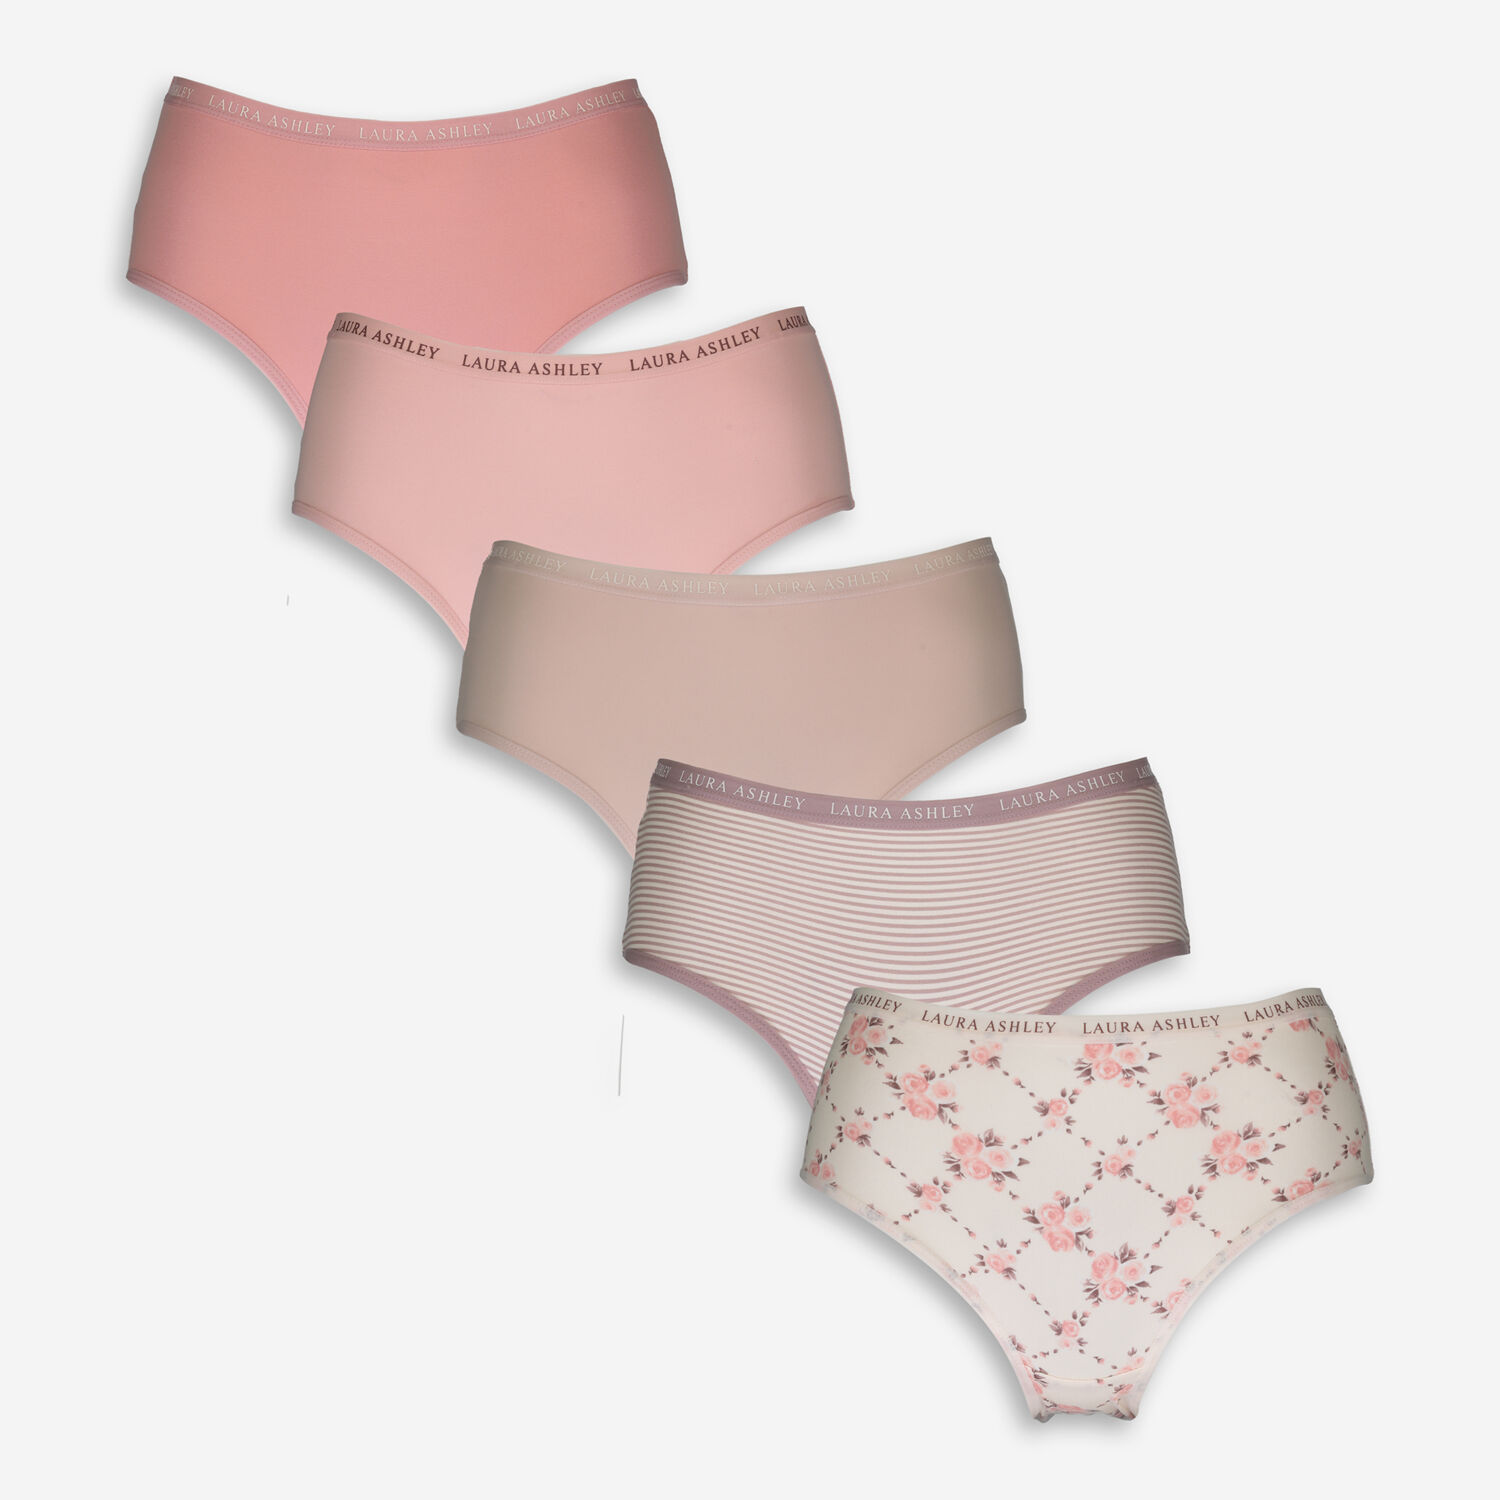 Buy Floral Embroidered Knickers from the Laura Ashley online shop